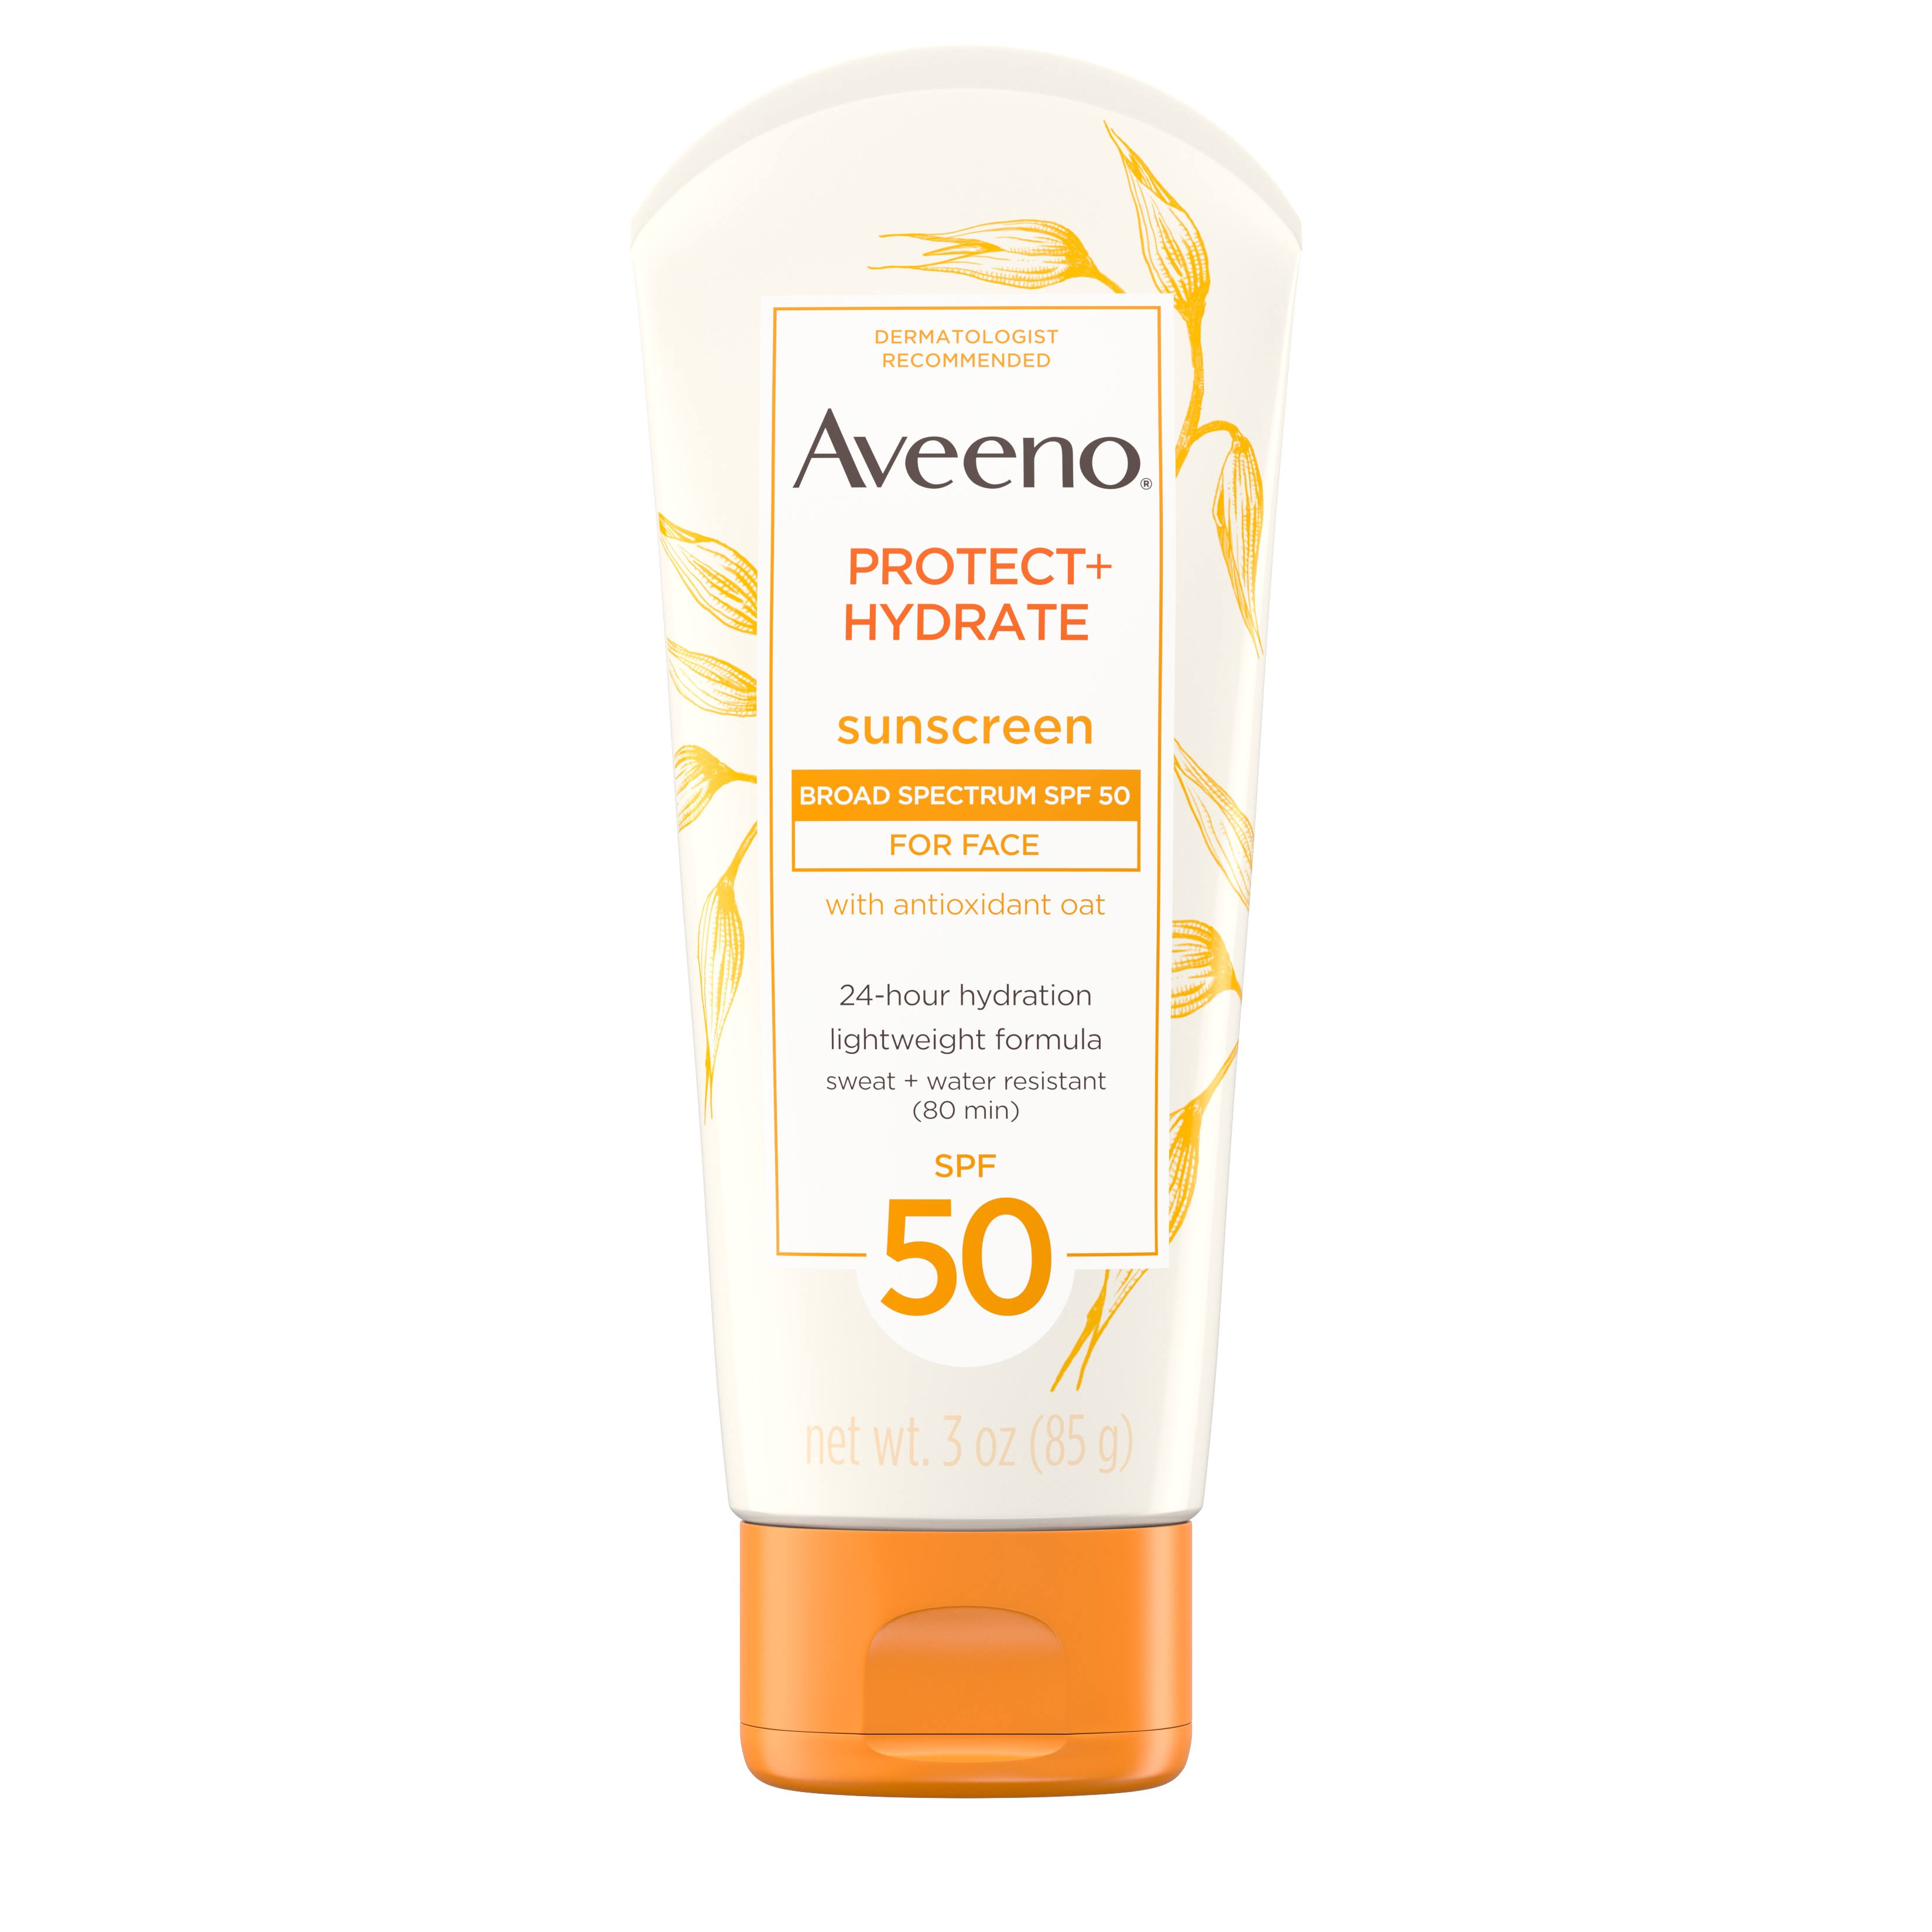 Aveeno Active Naturals Protect Hydrate Broad Spectrum Sunscreen Lotion - SPF 50, 3oz